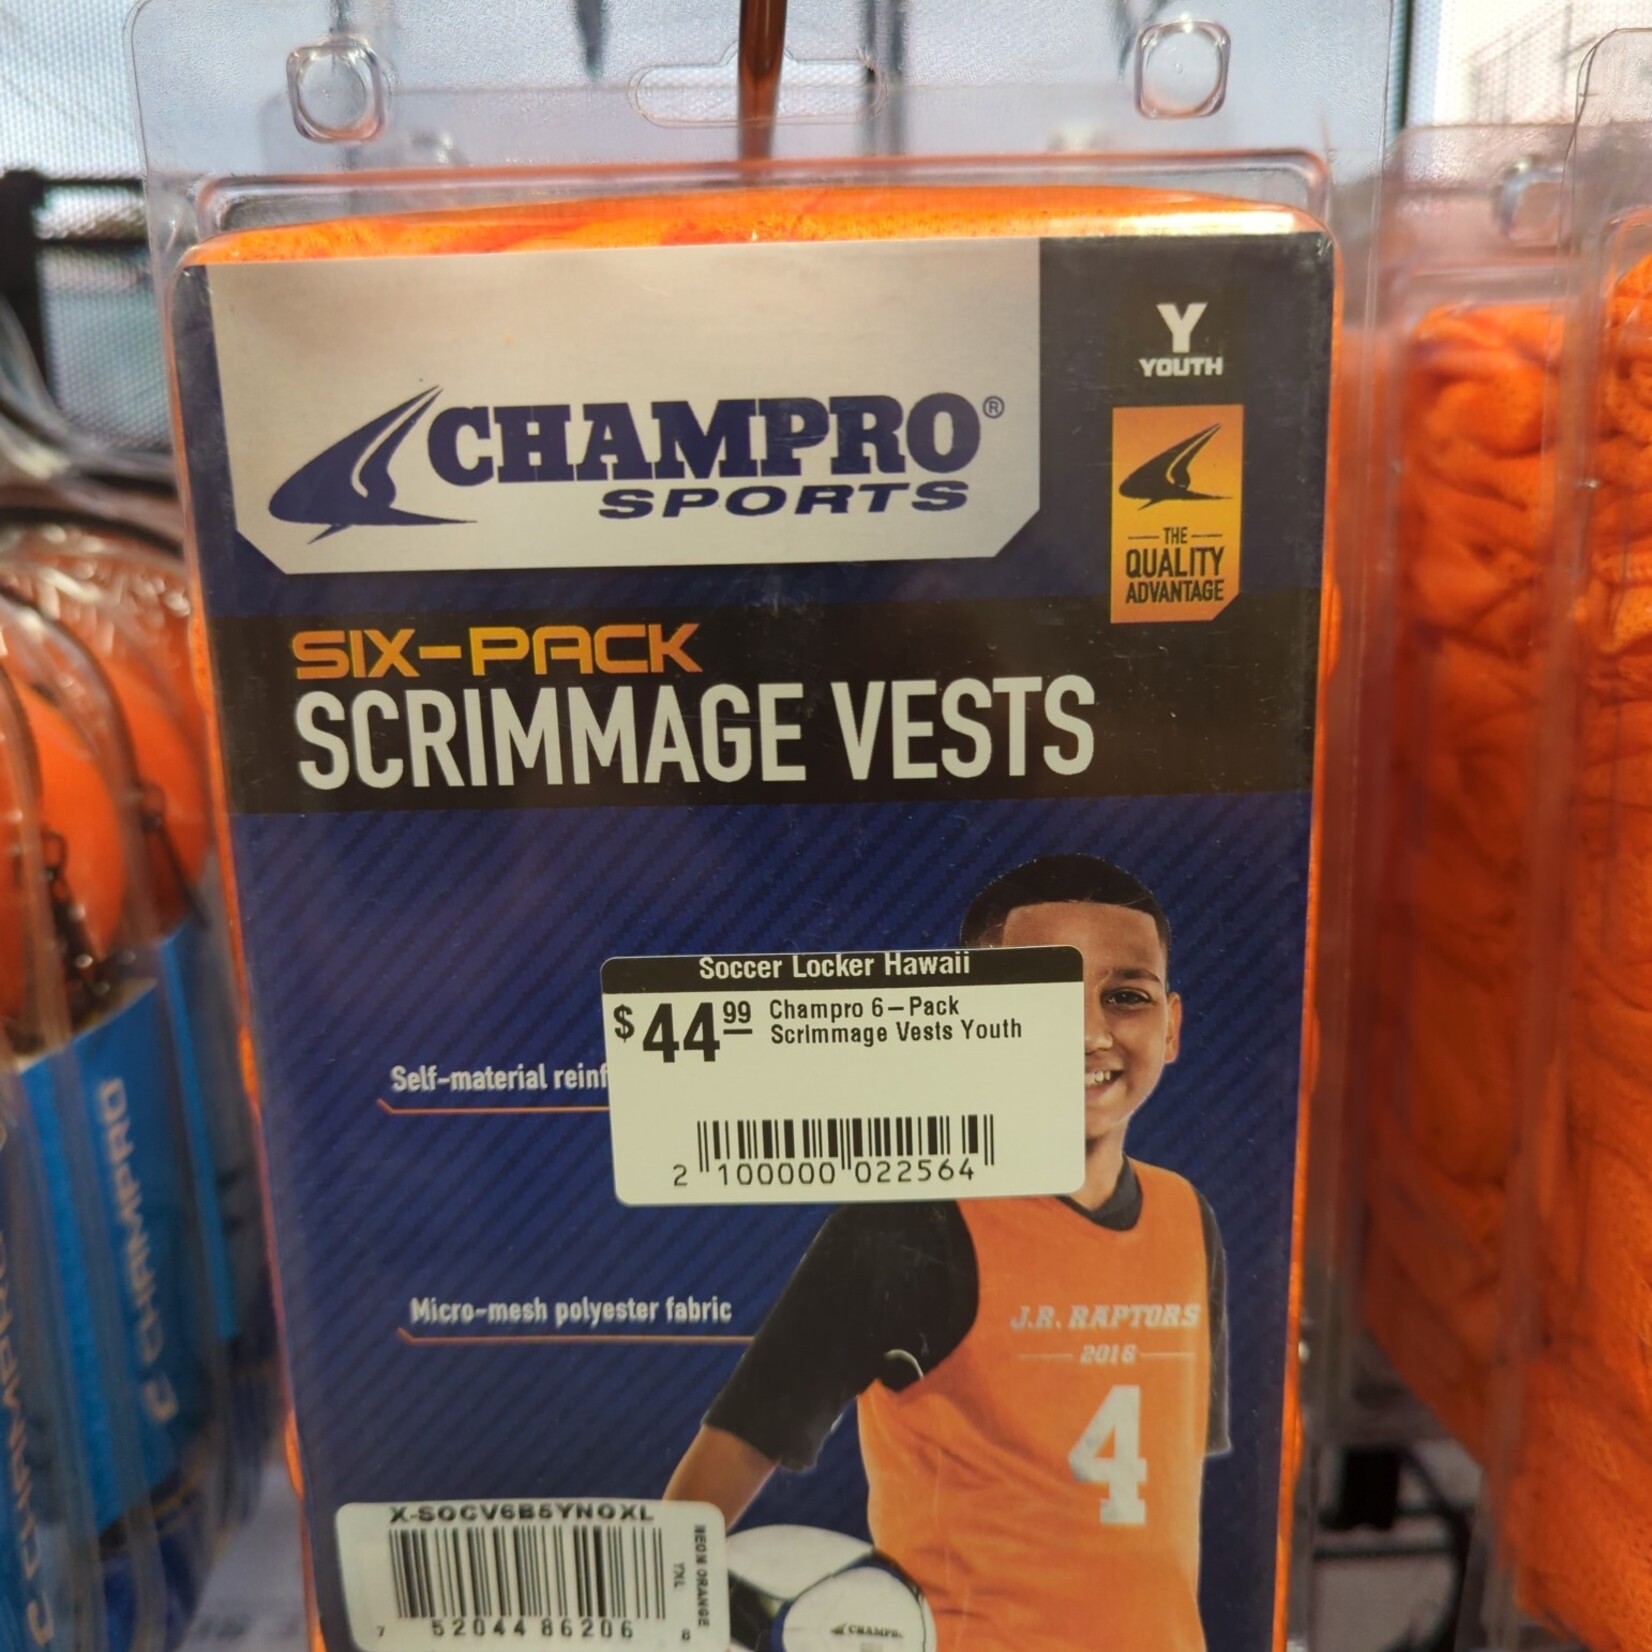 Champro Champro 6-Pack Scrimmage Vest Youth